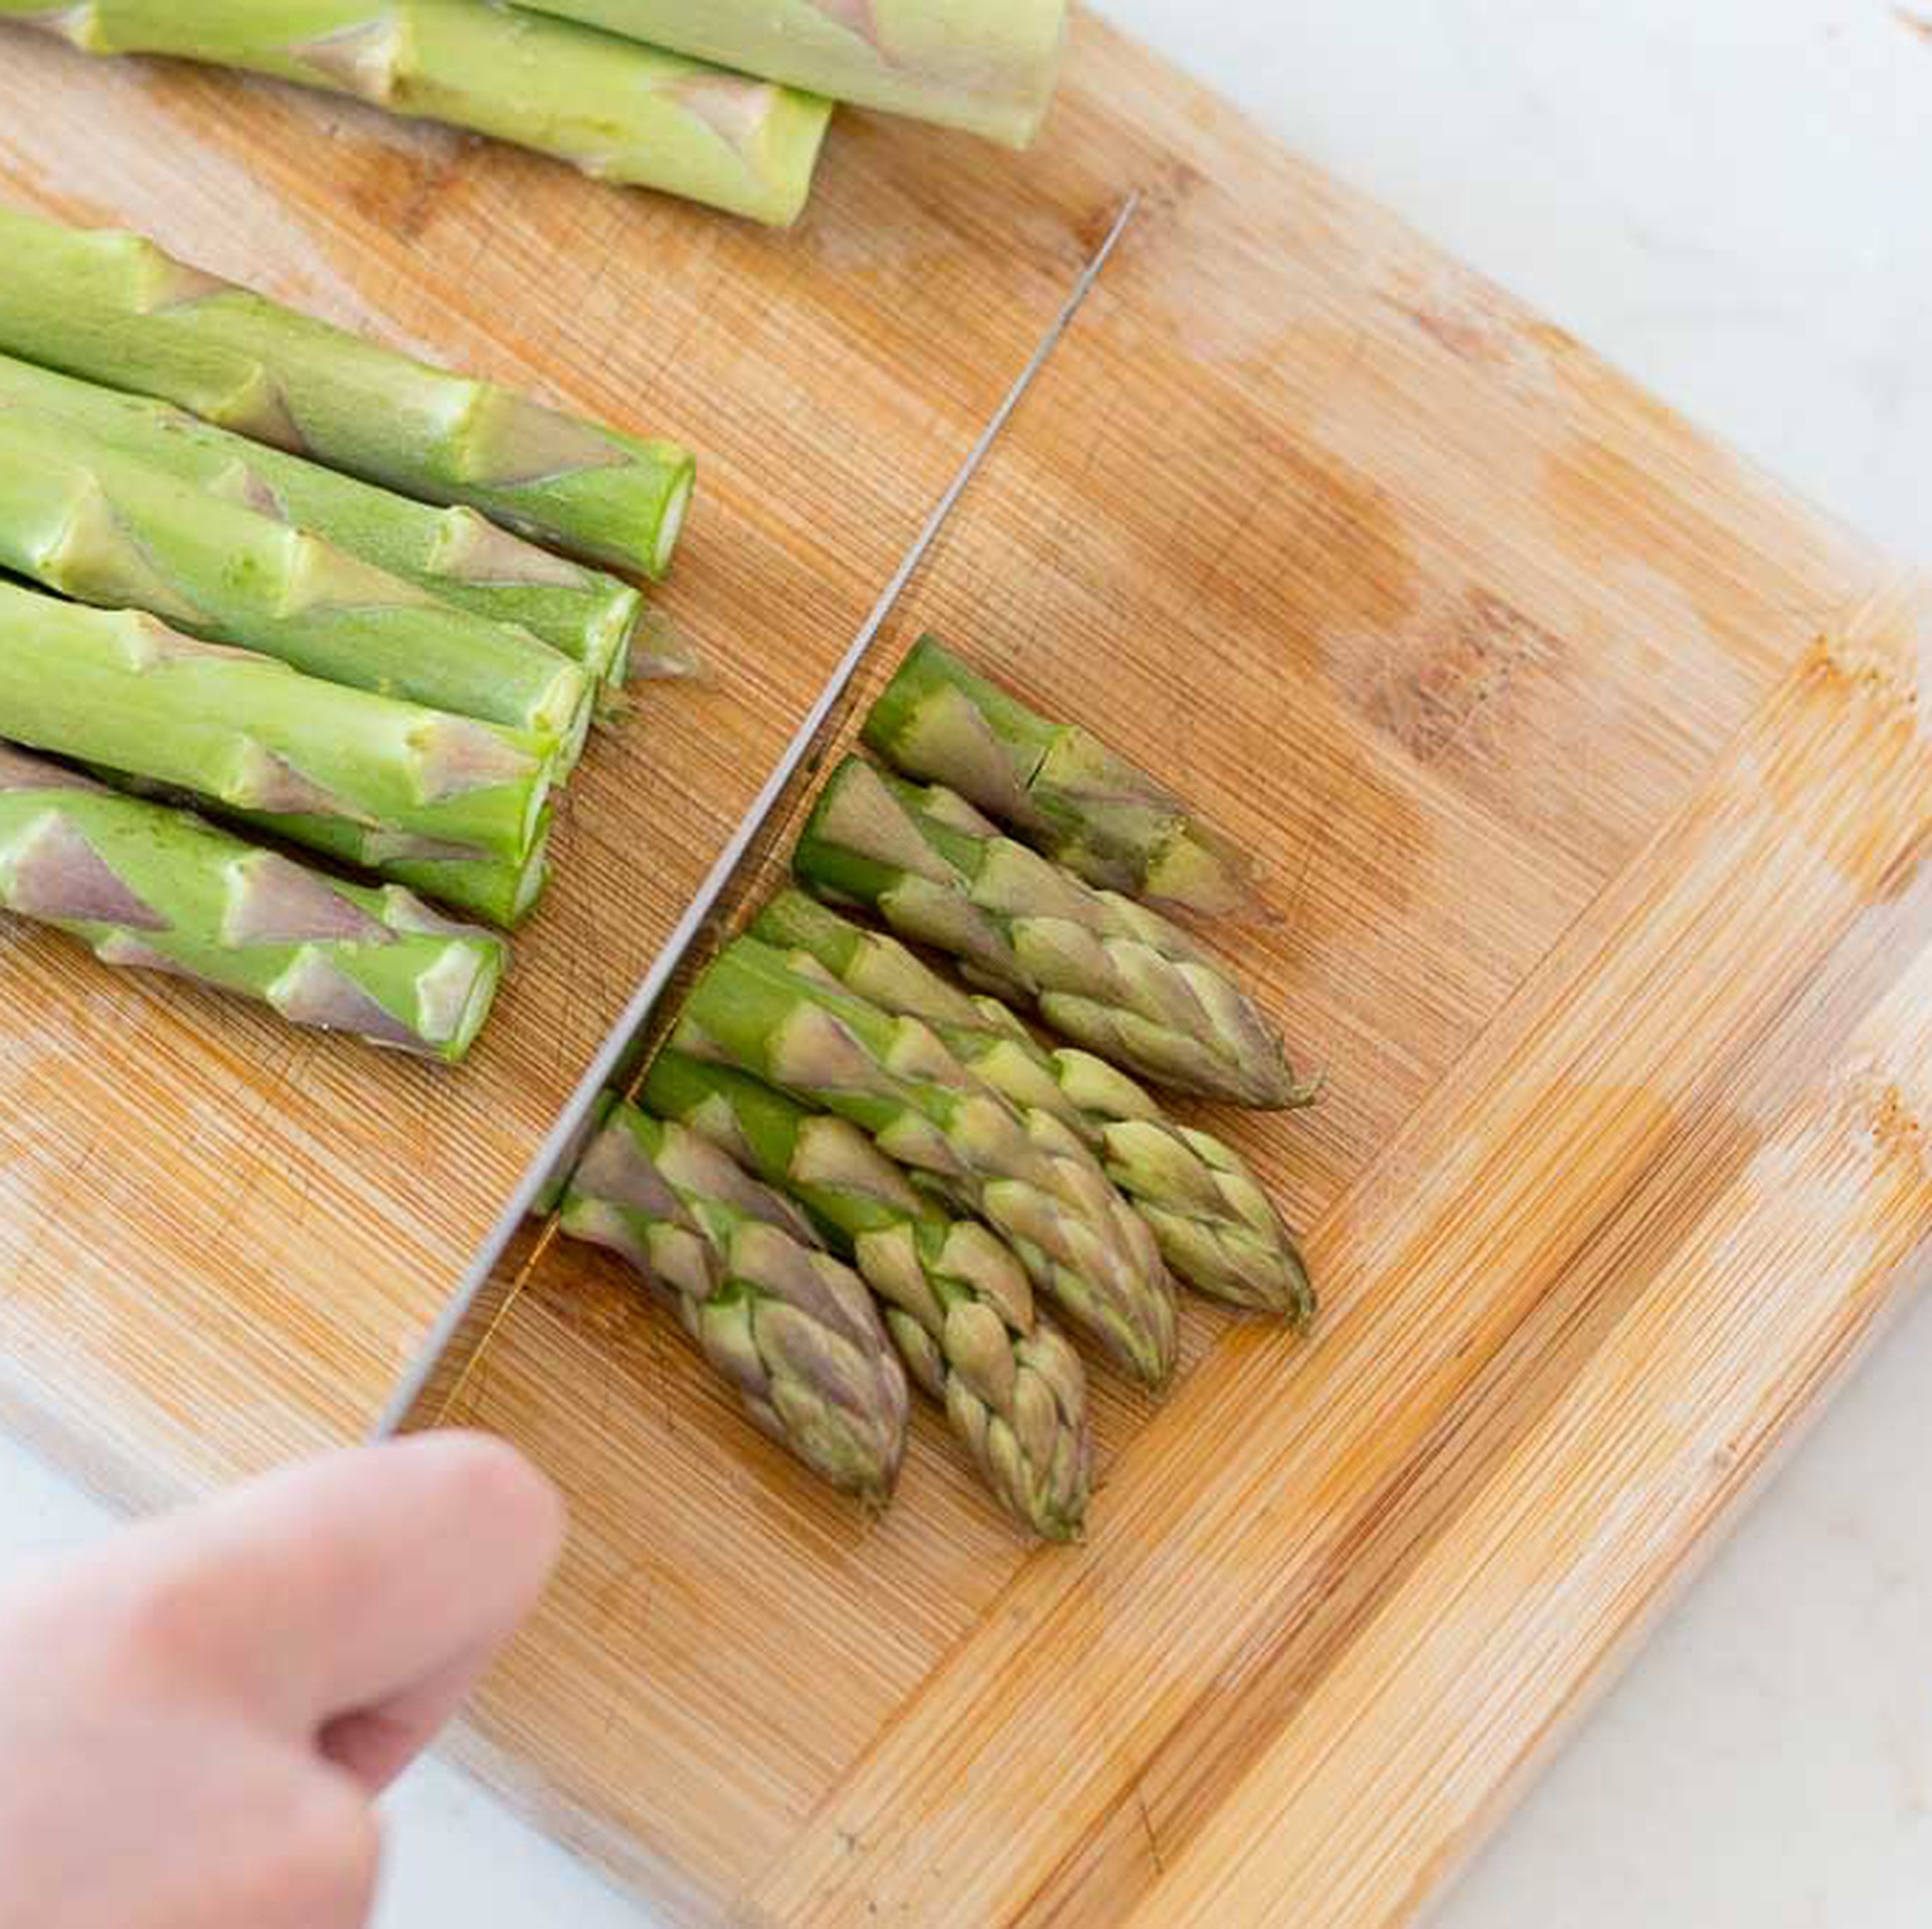 Chop the asparagus, leaving the woody roots aside. Chop the flowers first and cut them in half. Chop the reming of the stems as rings.